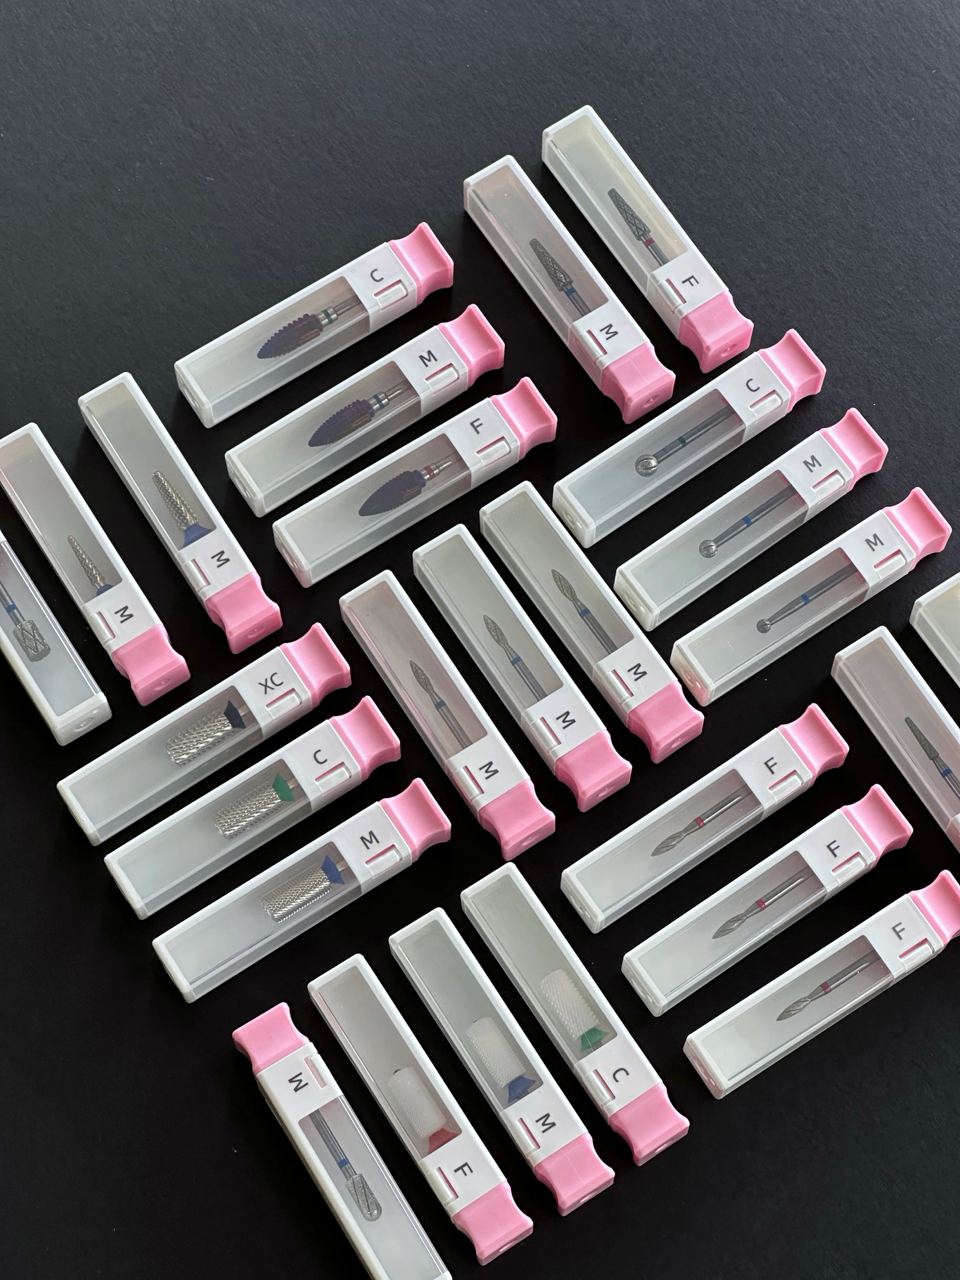  The image shows a collection of nail drill bits from MUSE, organized in a square pattern on a dark background, each piece encased in an individual clear container with a pink lid, labeled with different letters indicating the bit type.